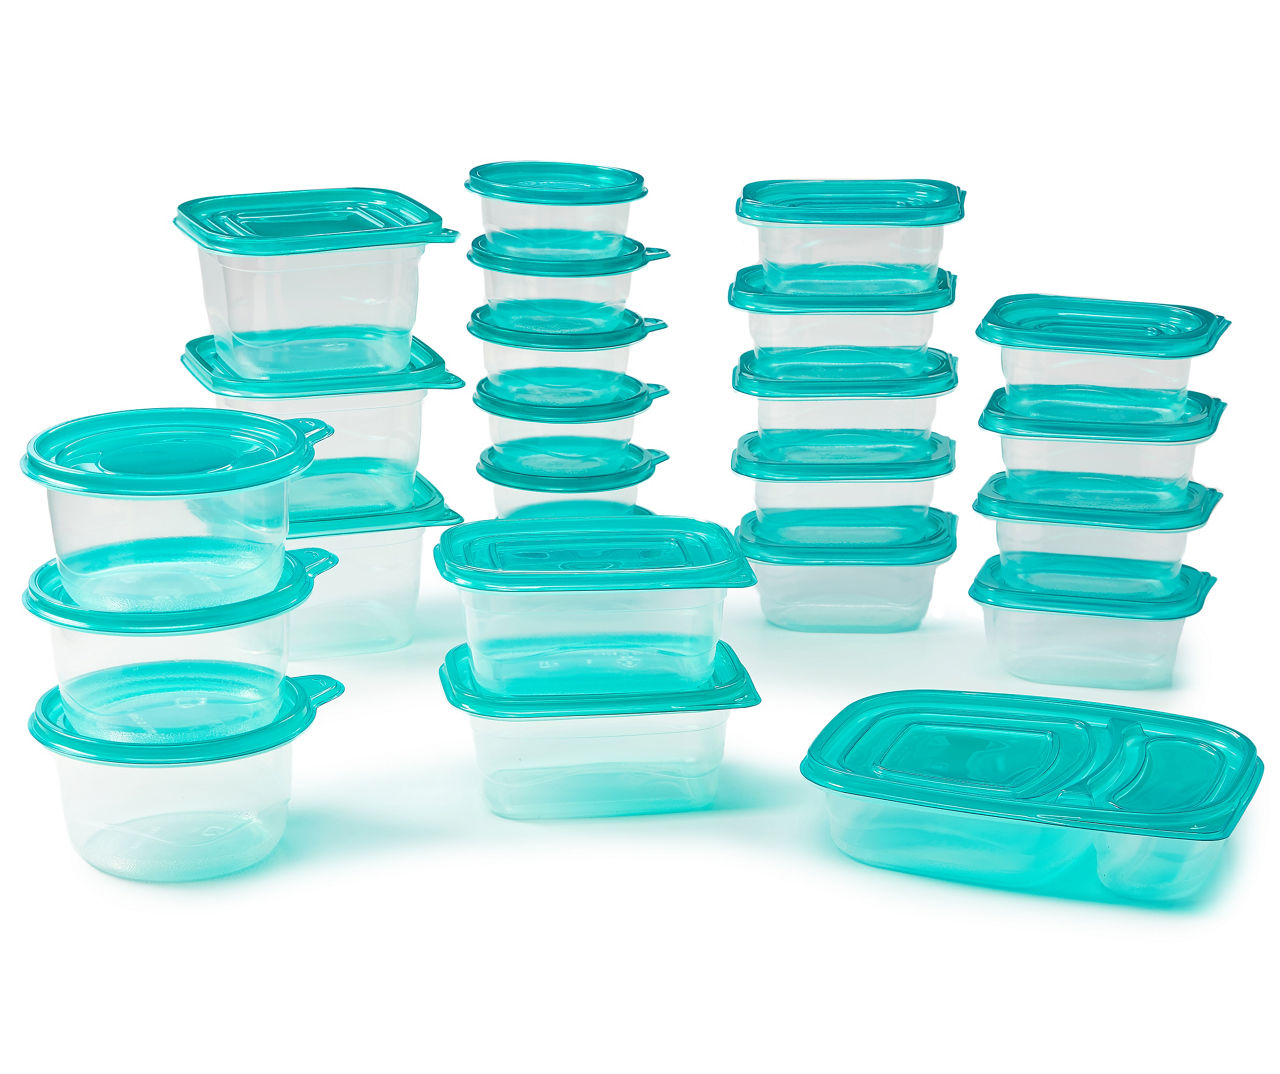 Rubbermaid Food Storage 38 Piece Set with Easy Find Lids, Teal